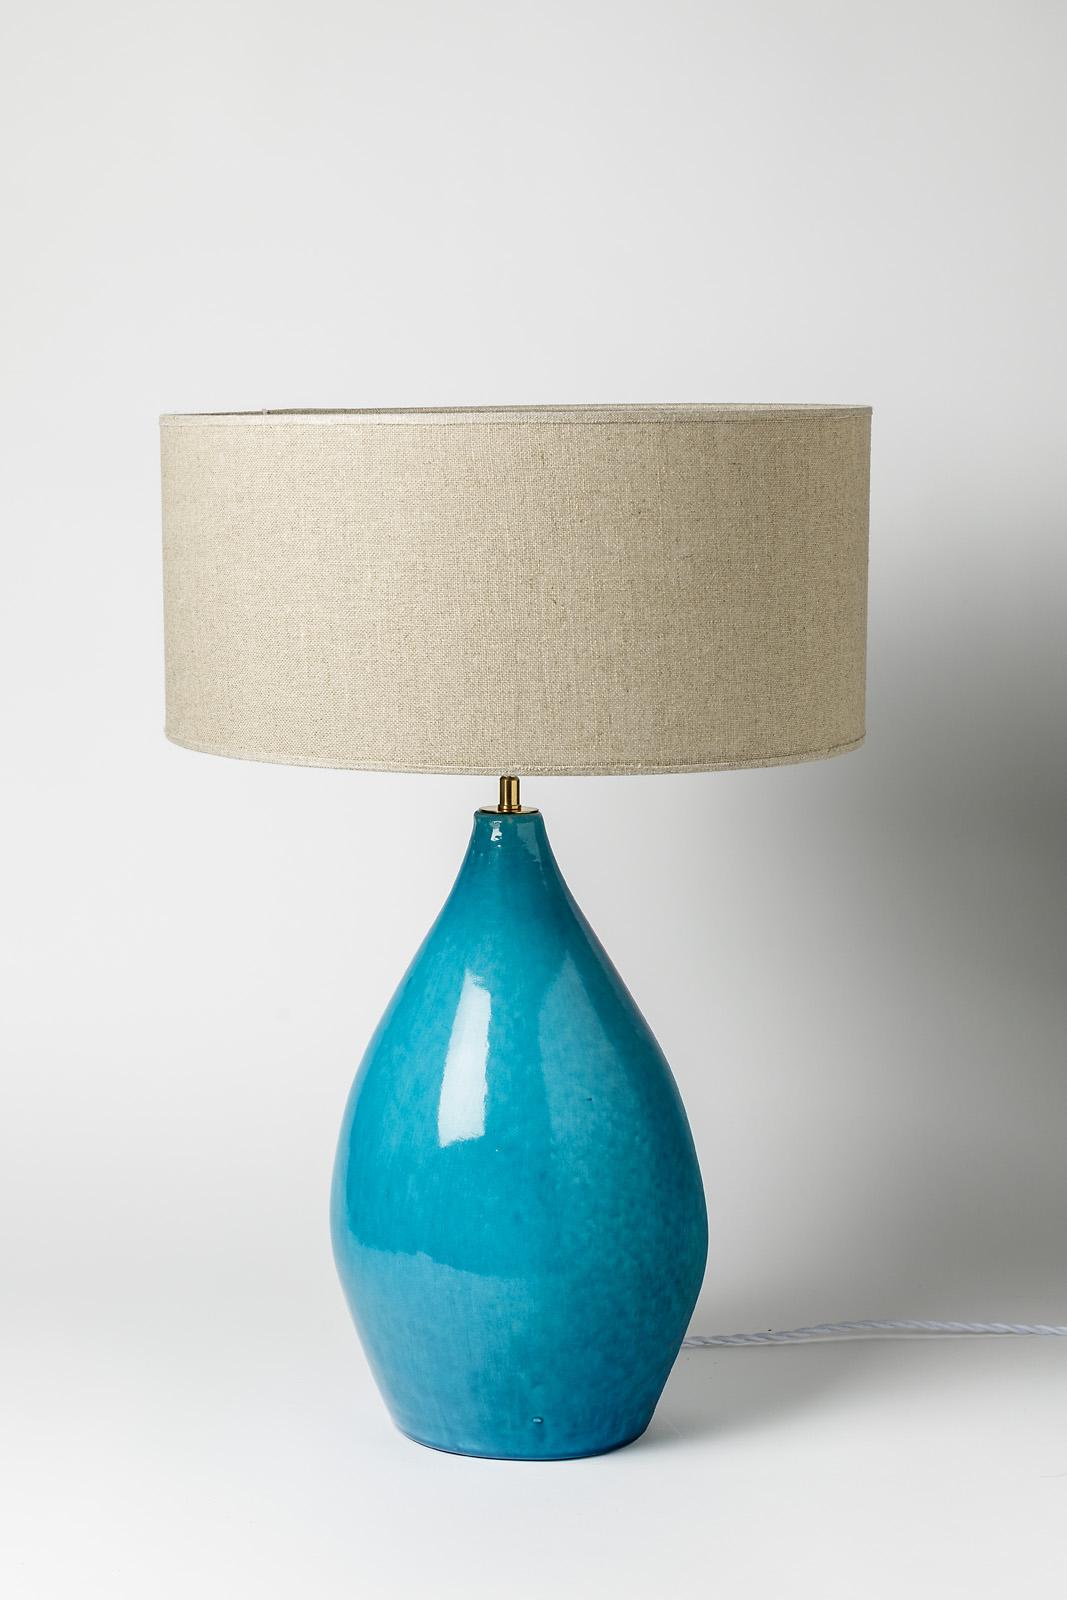 Large Blue 20th Century Ceramic Table Lamp by Jean Maubrou circa 1940 Art Deco For Sale 1